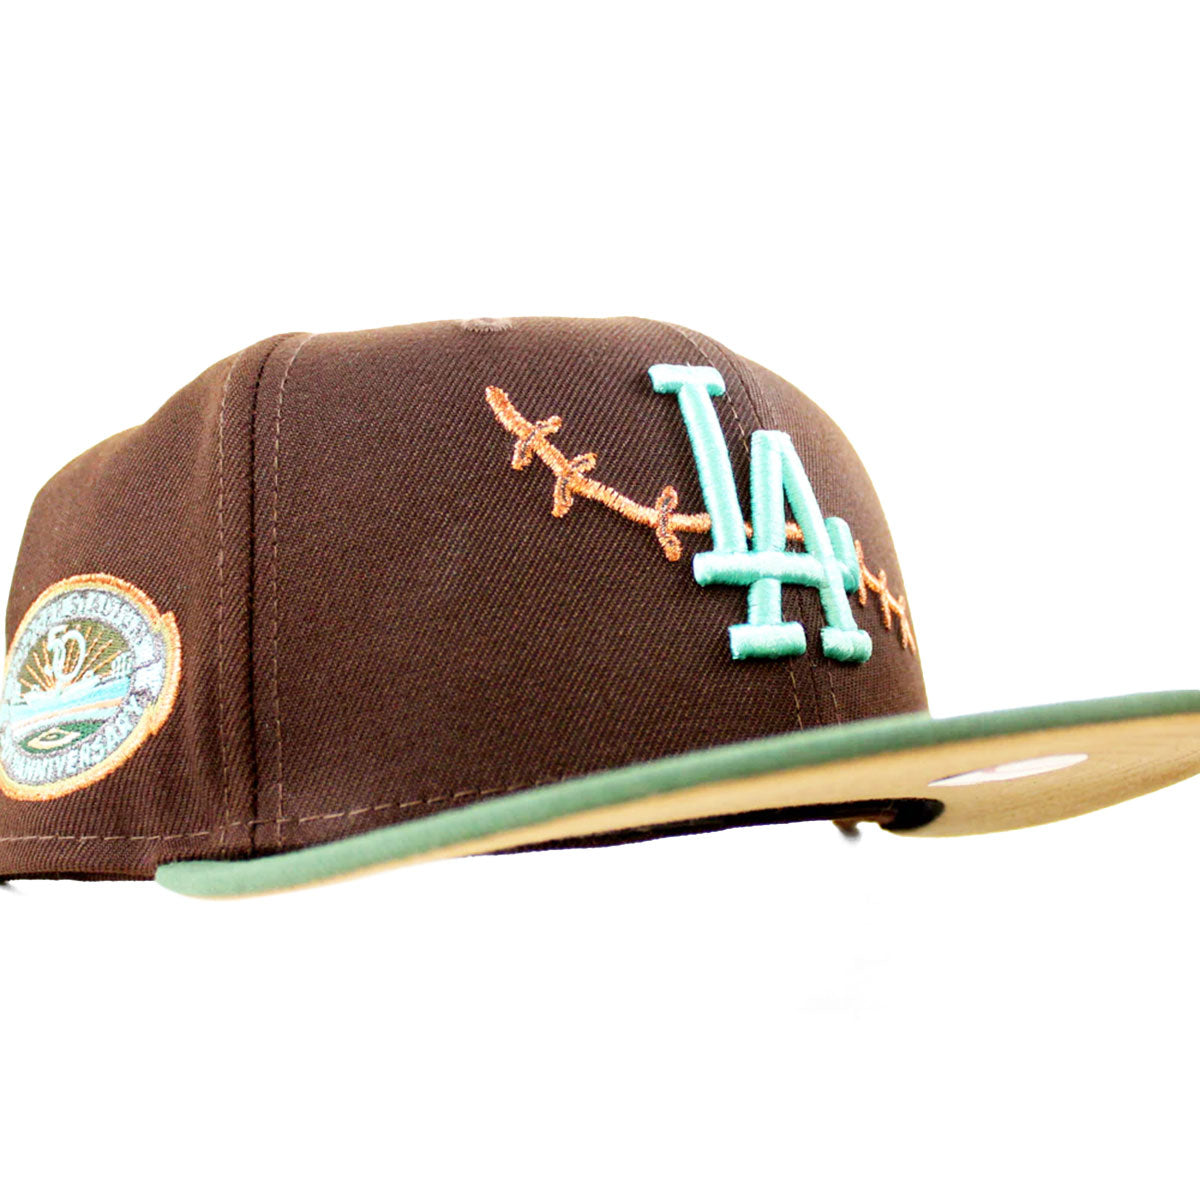 NEW ERA Los Angeles Dodgers - 59FIFTY 50TH ANV ZOMBIE PACK BURNT WOOD